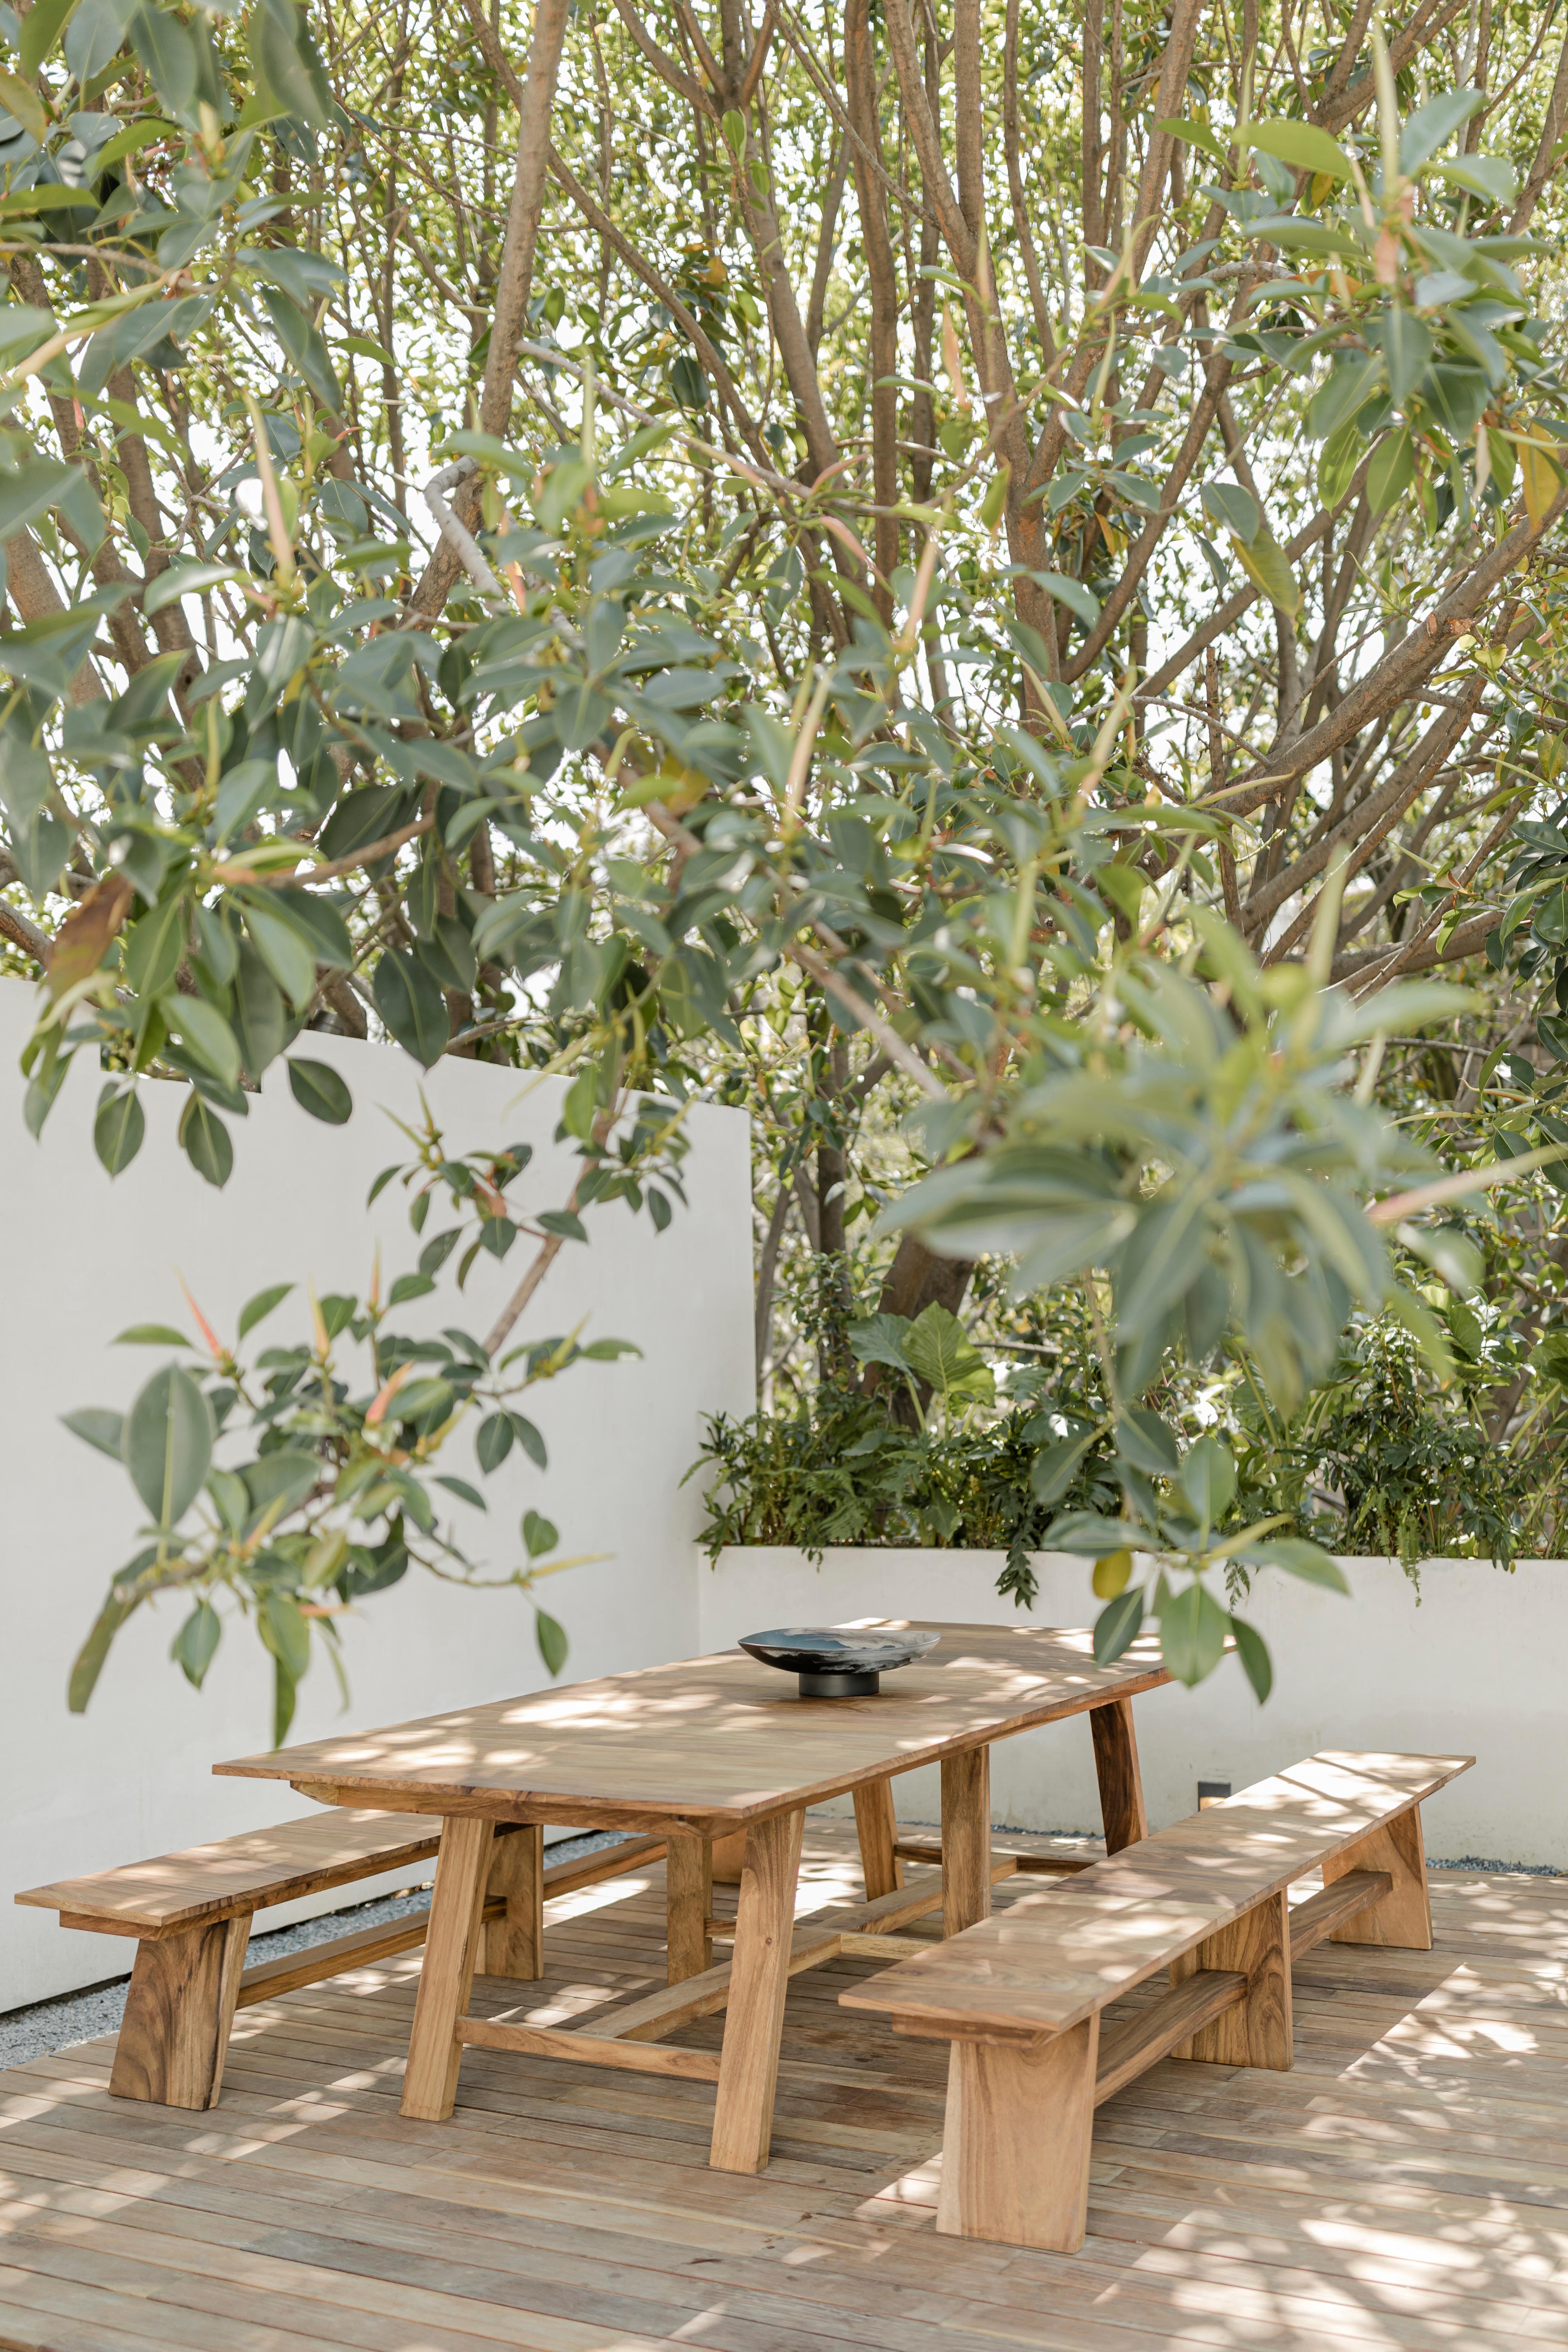 The Playamar Dining Table is inspired by ingenious and rural furniture, with the purpose of enjoying life outdoors.
Production time: 8-10 weeks for items without marble / 13-14 weeks for marble pieces. Shipping +10 additional business days. Casa